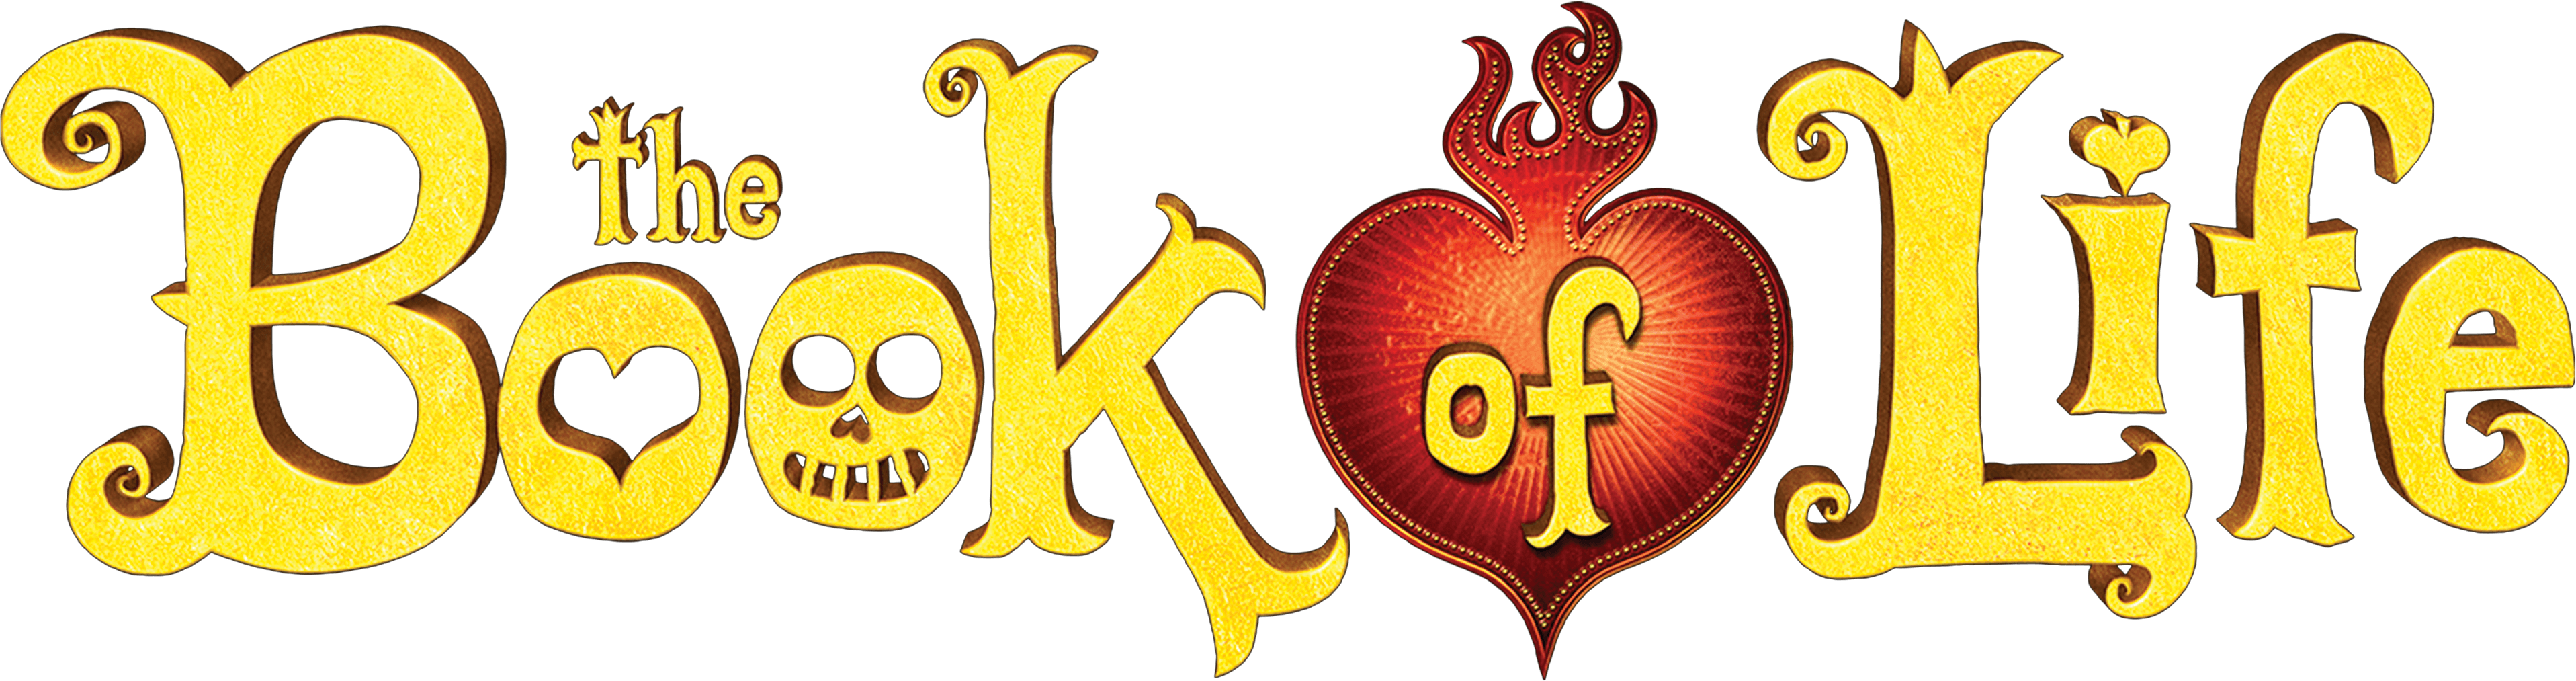 The Book of Life logo